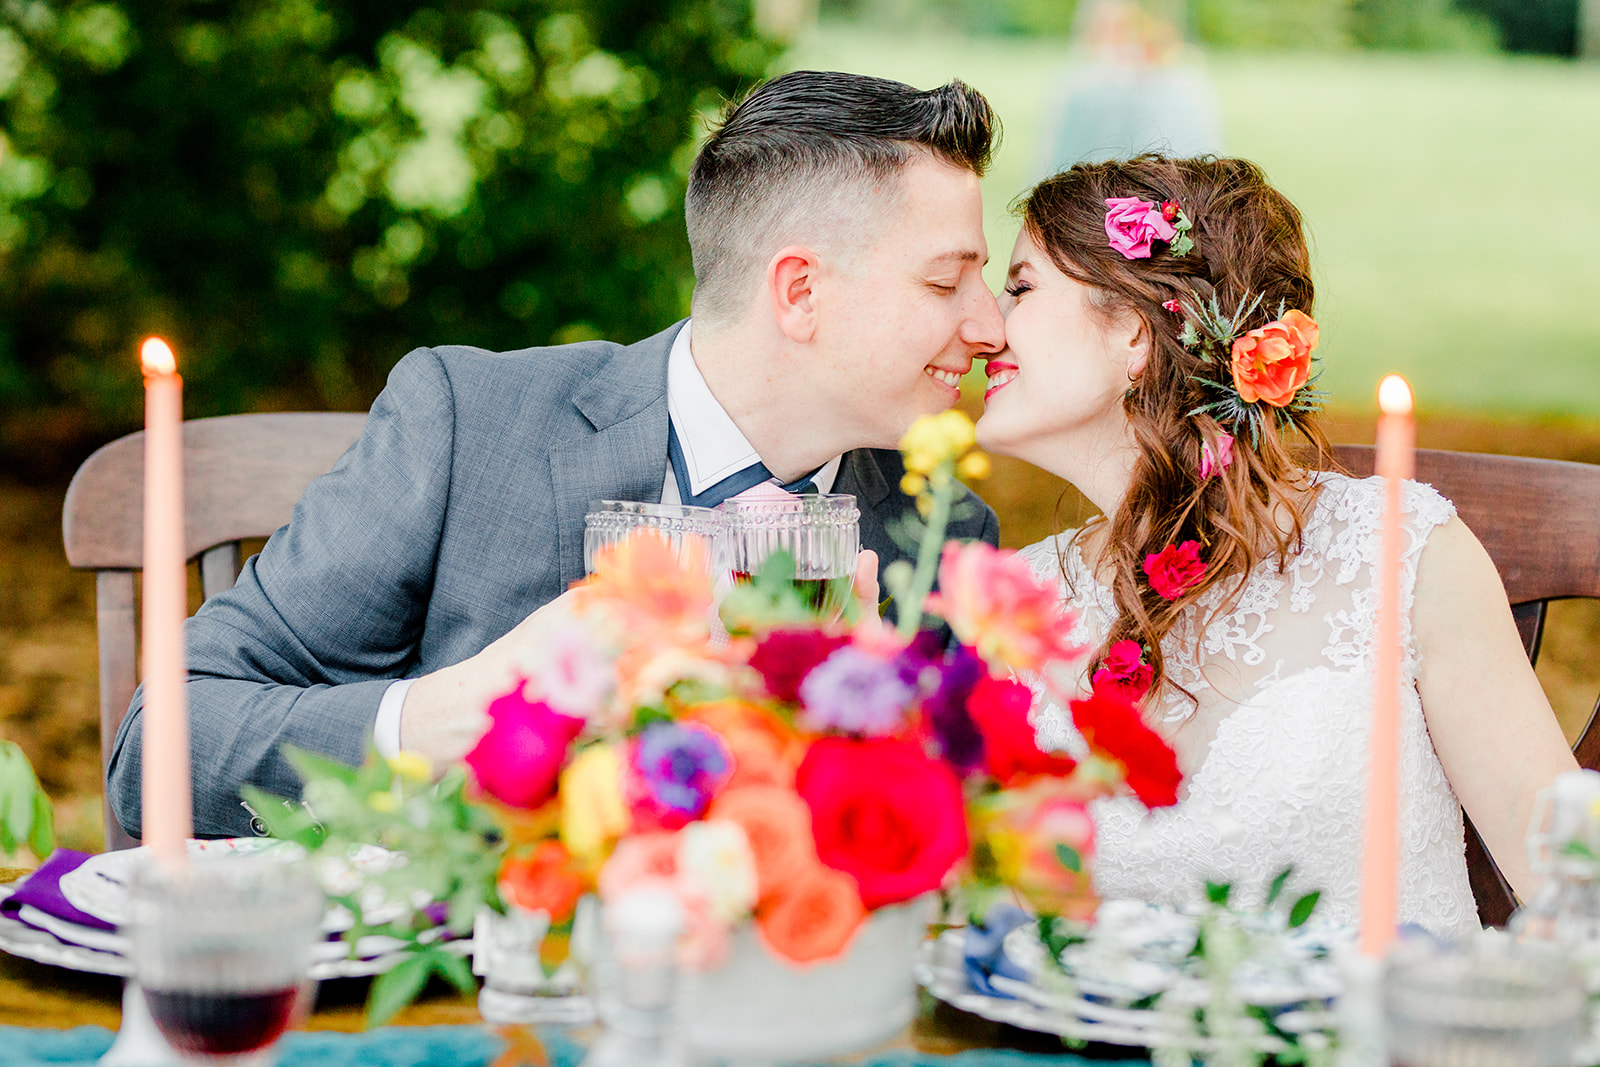 Bright + Cheerful Garden Elegance of Artmosphere — Bride + Groom at their colorful reception